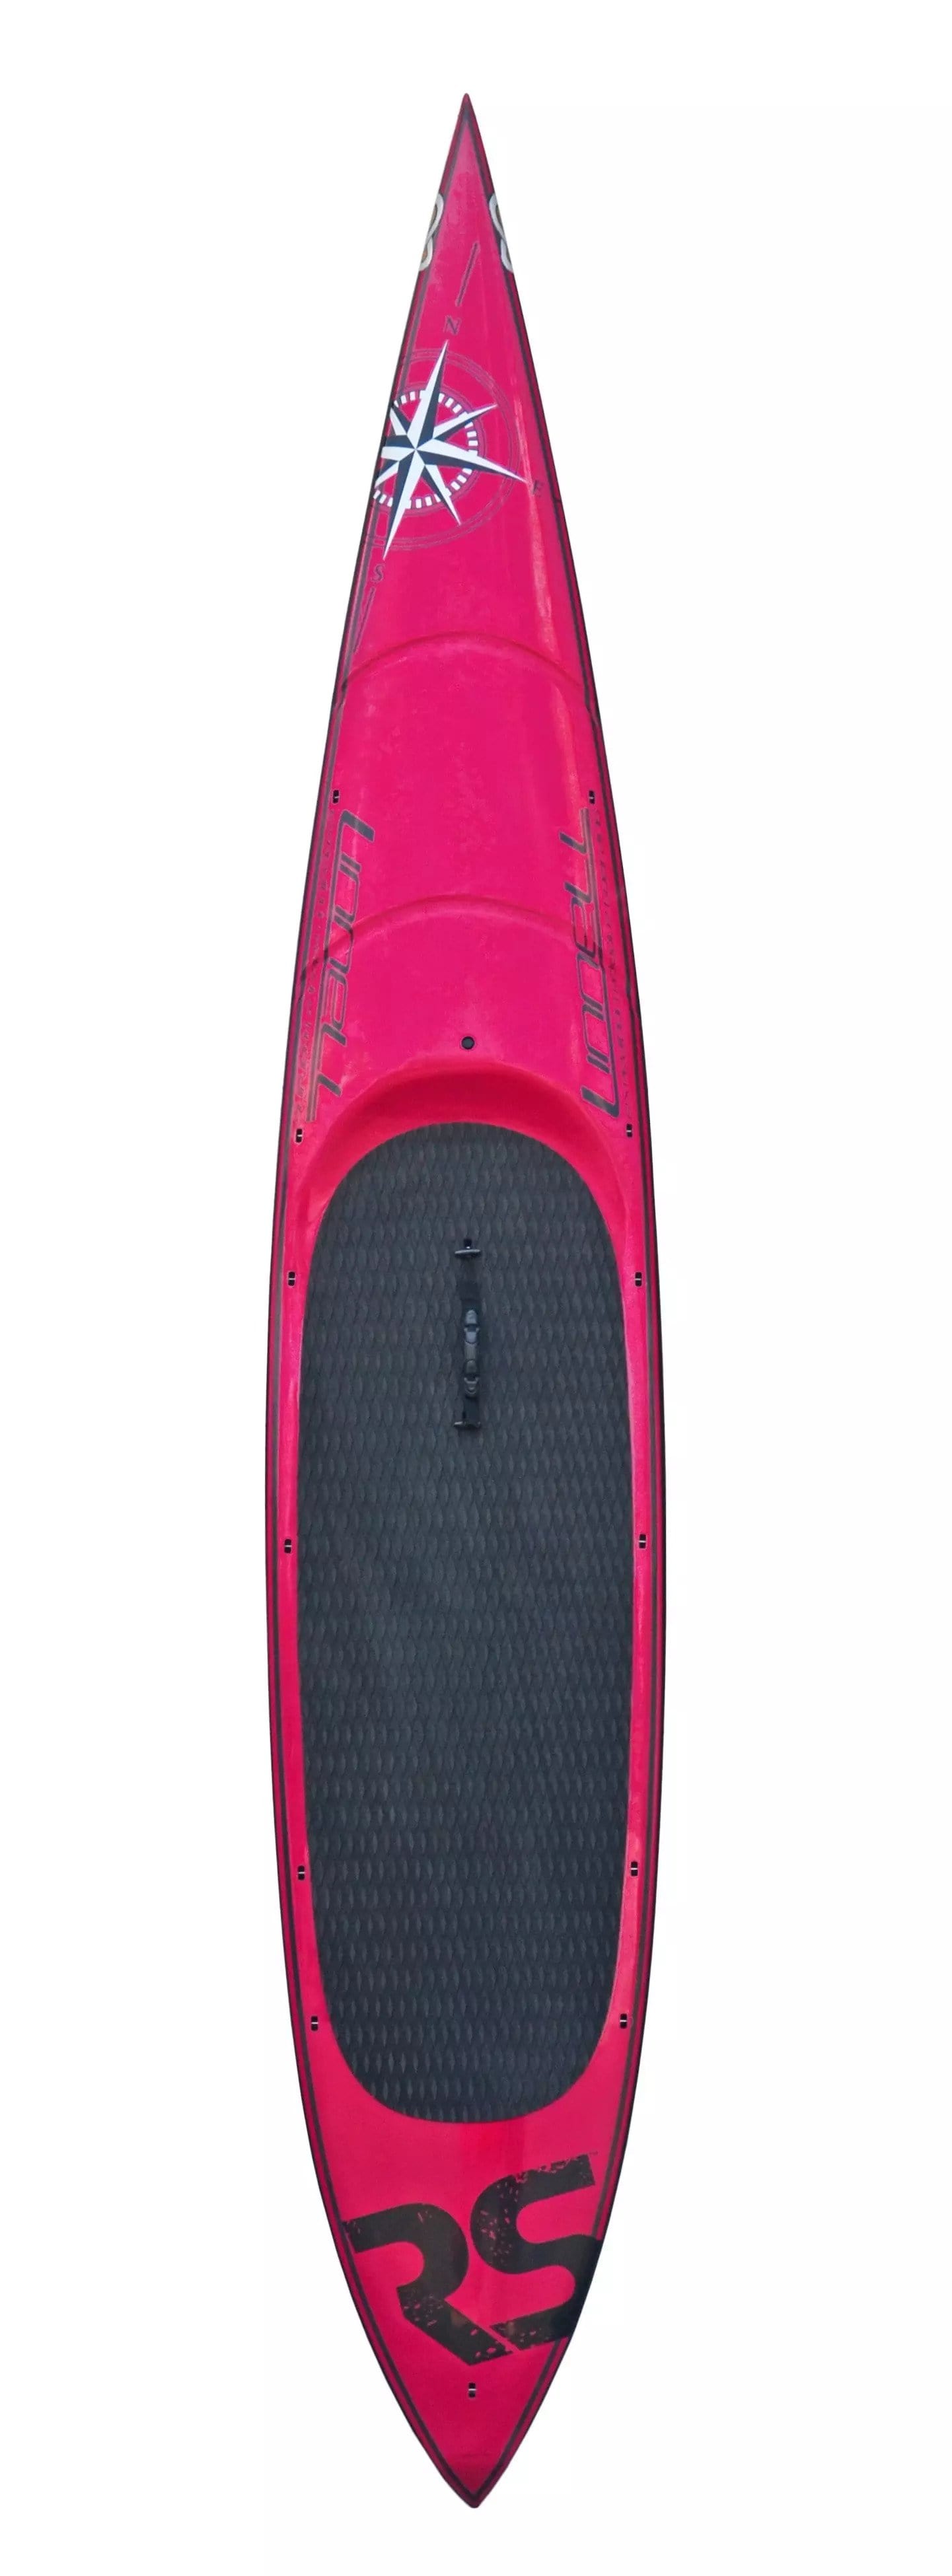 RAVE Paddle Board Signature Performance Stand Up Paddle Board (SUP)